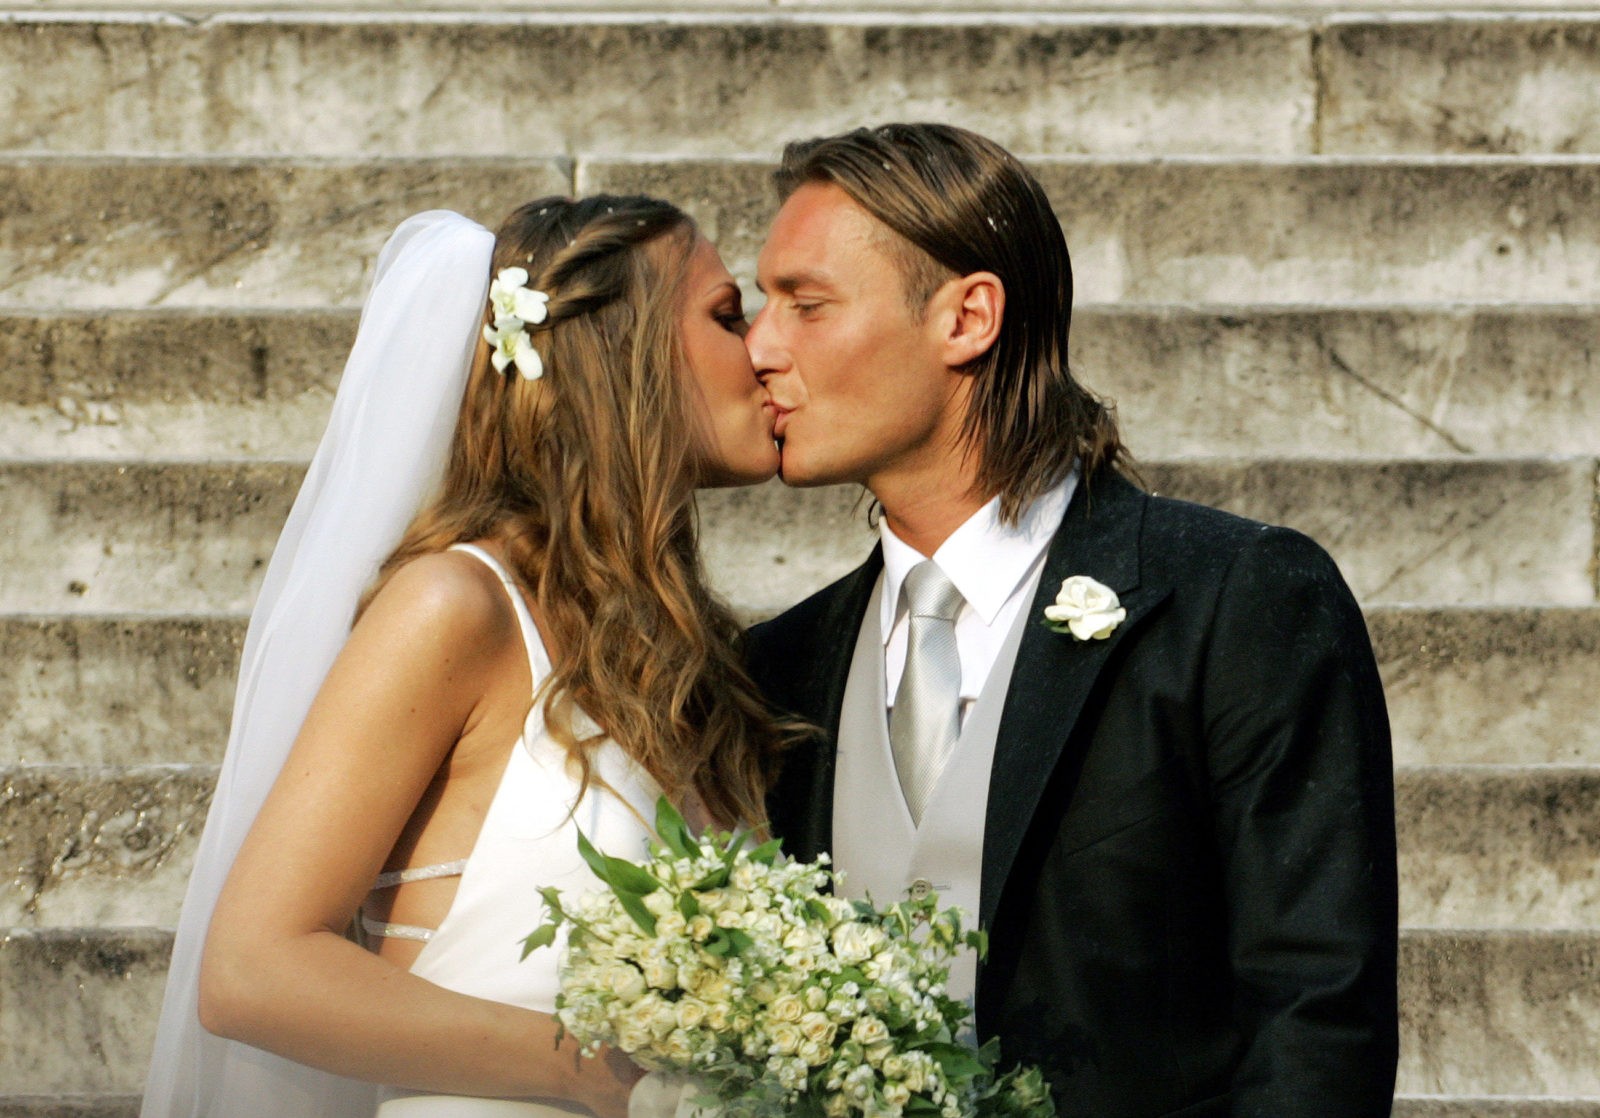 AS Roma captain Francesco Totti (R) kisses his wife Italian TV star Hilary Blasi after their wedding 19 June 2005 in Rome. AFP PHOTO/Andreas SOLARO (Photo credit should read ANDREAS SOLARO/AFP/Getty Images)